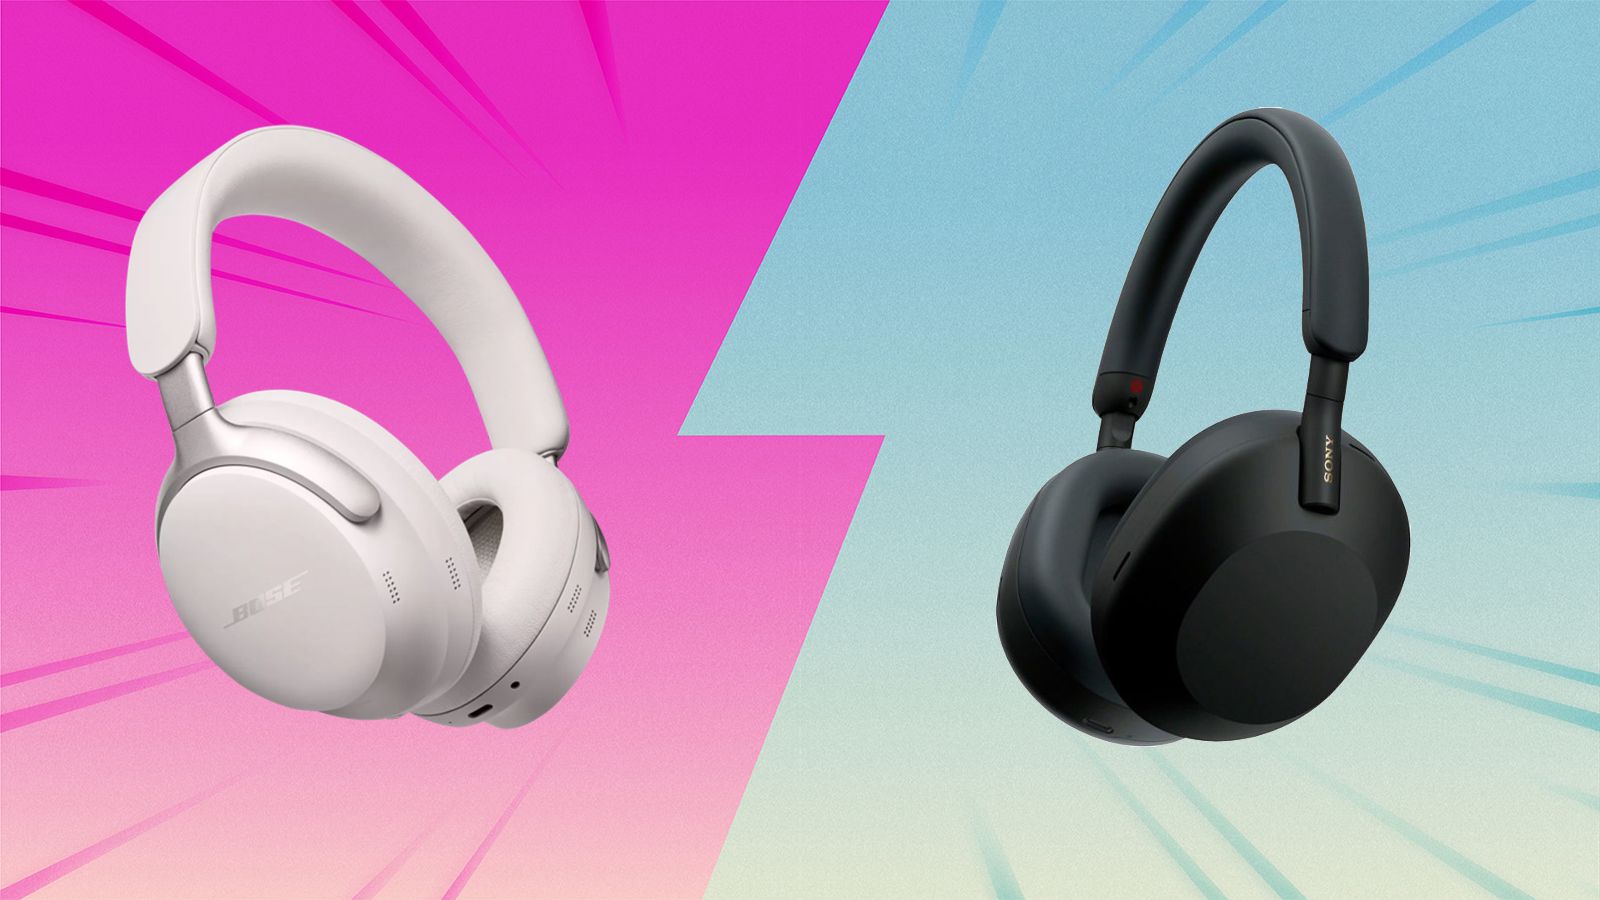 Sony WH-1000XM3 vs Sony WH-1000XM4: which over-ear headphones are